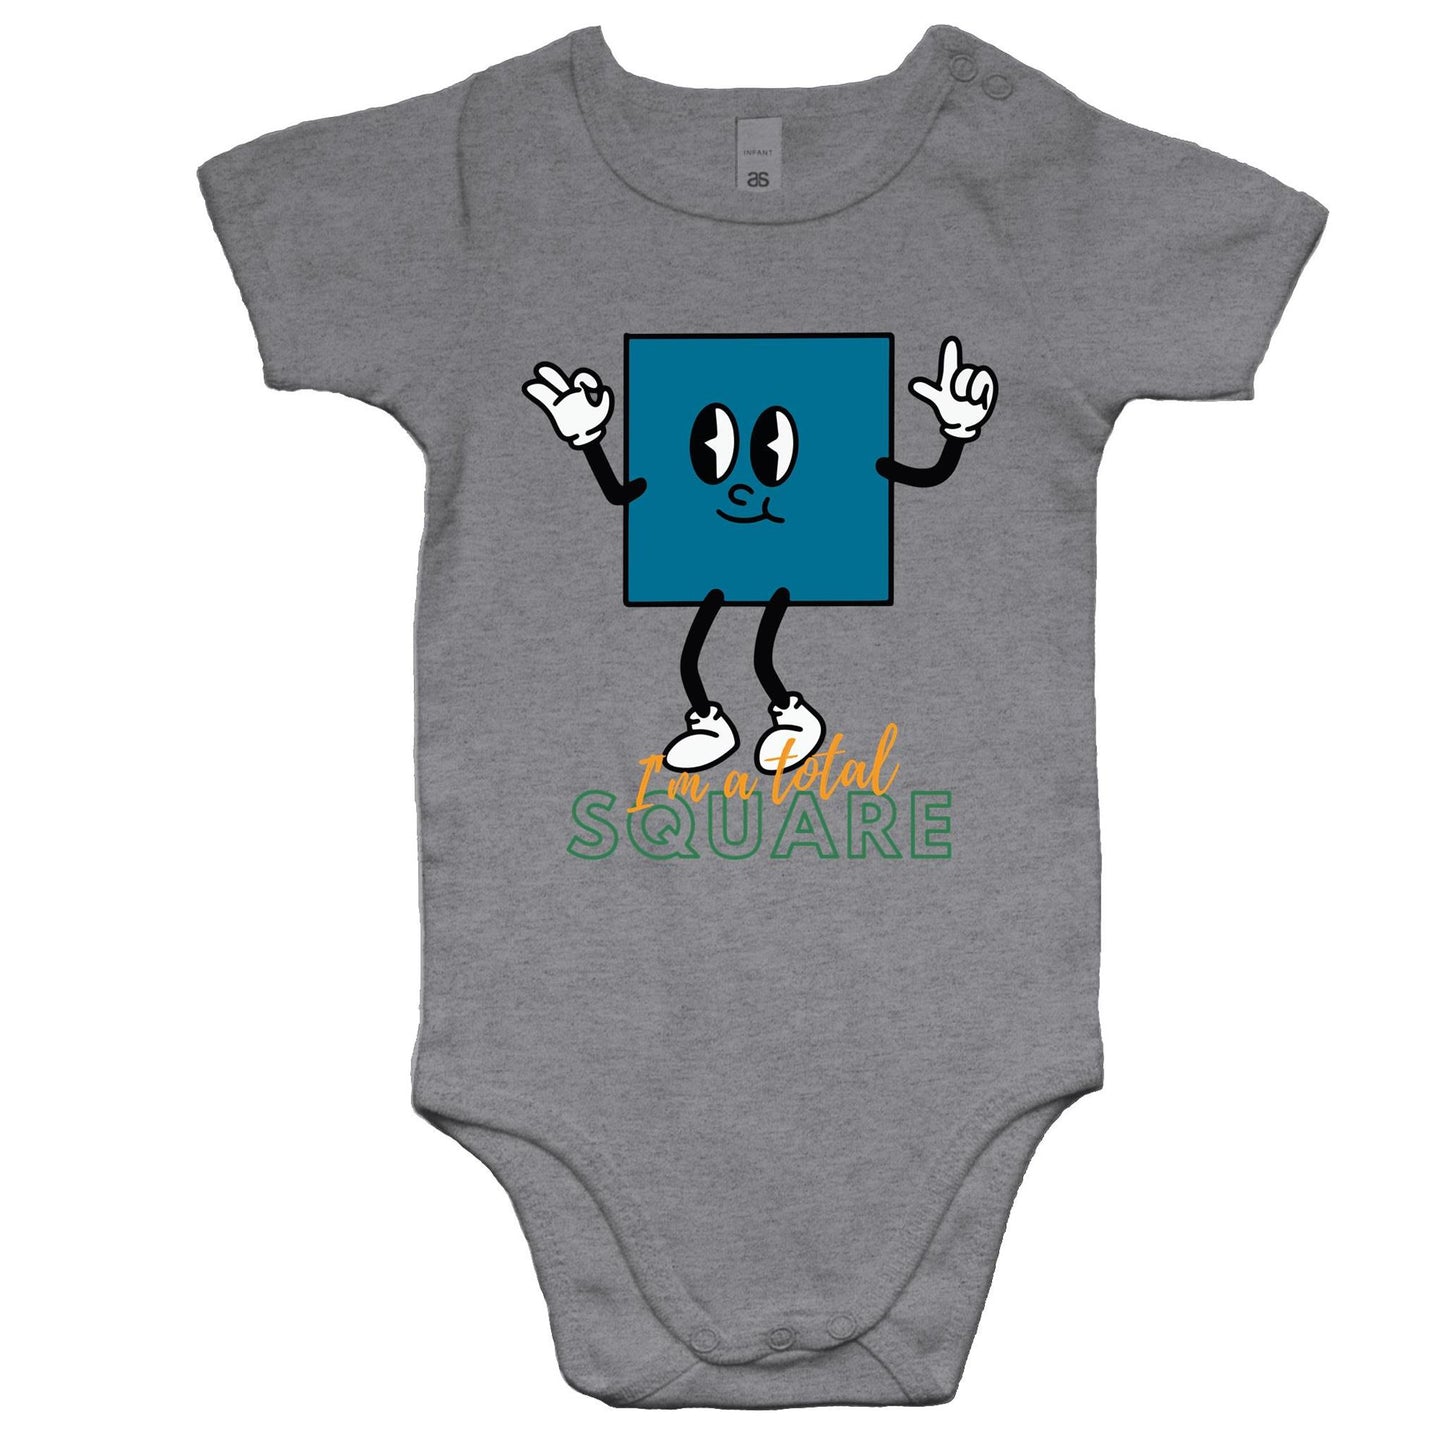 I'm A Total Square - Baby Bodysuit Grey Marle Baby Bodysuit Funny Maths Science